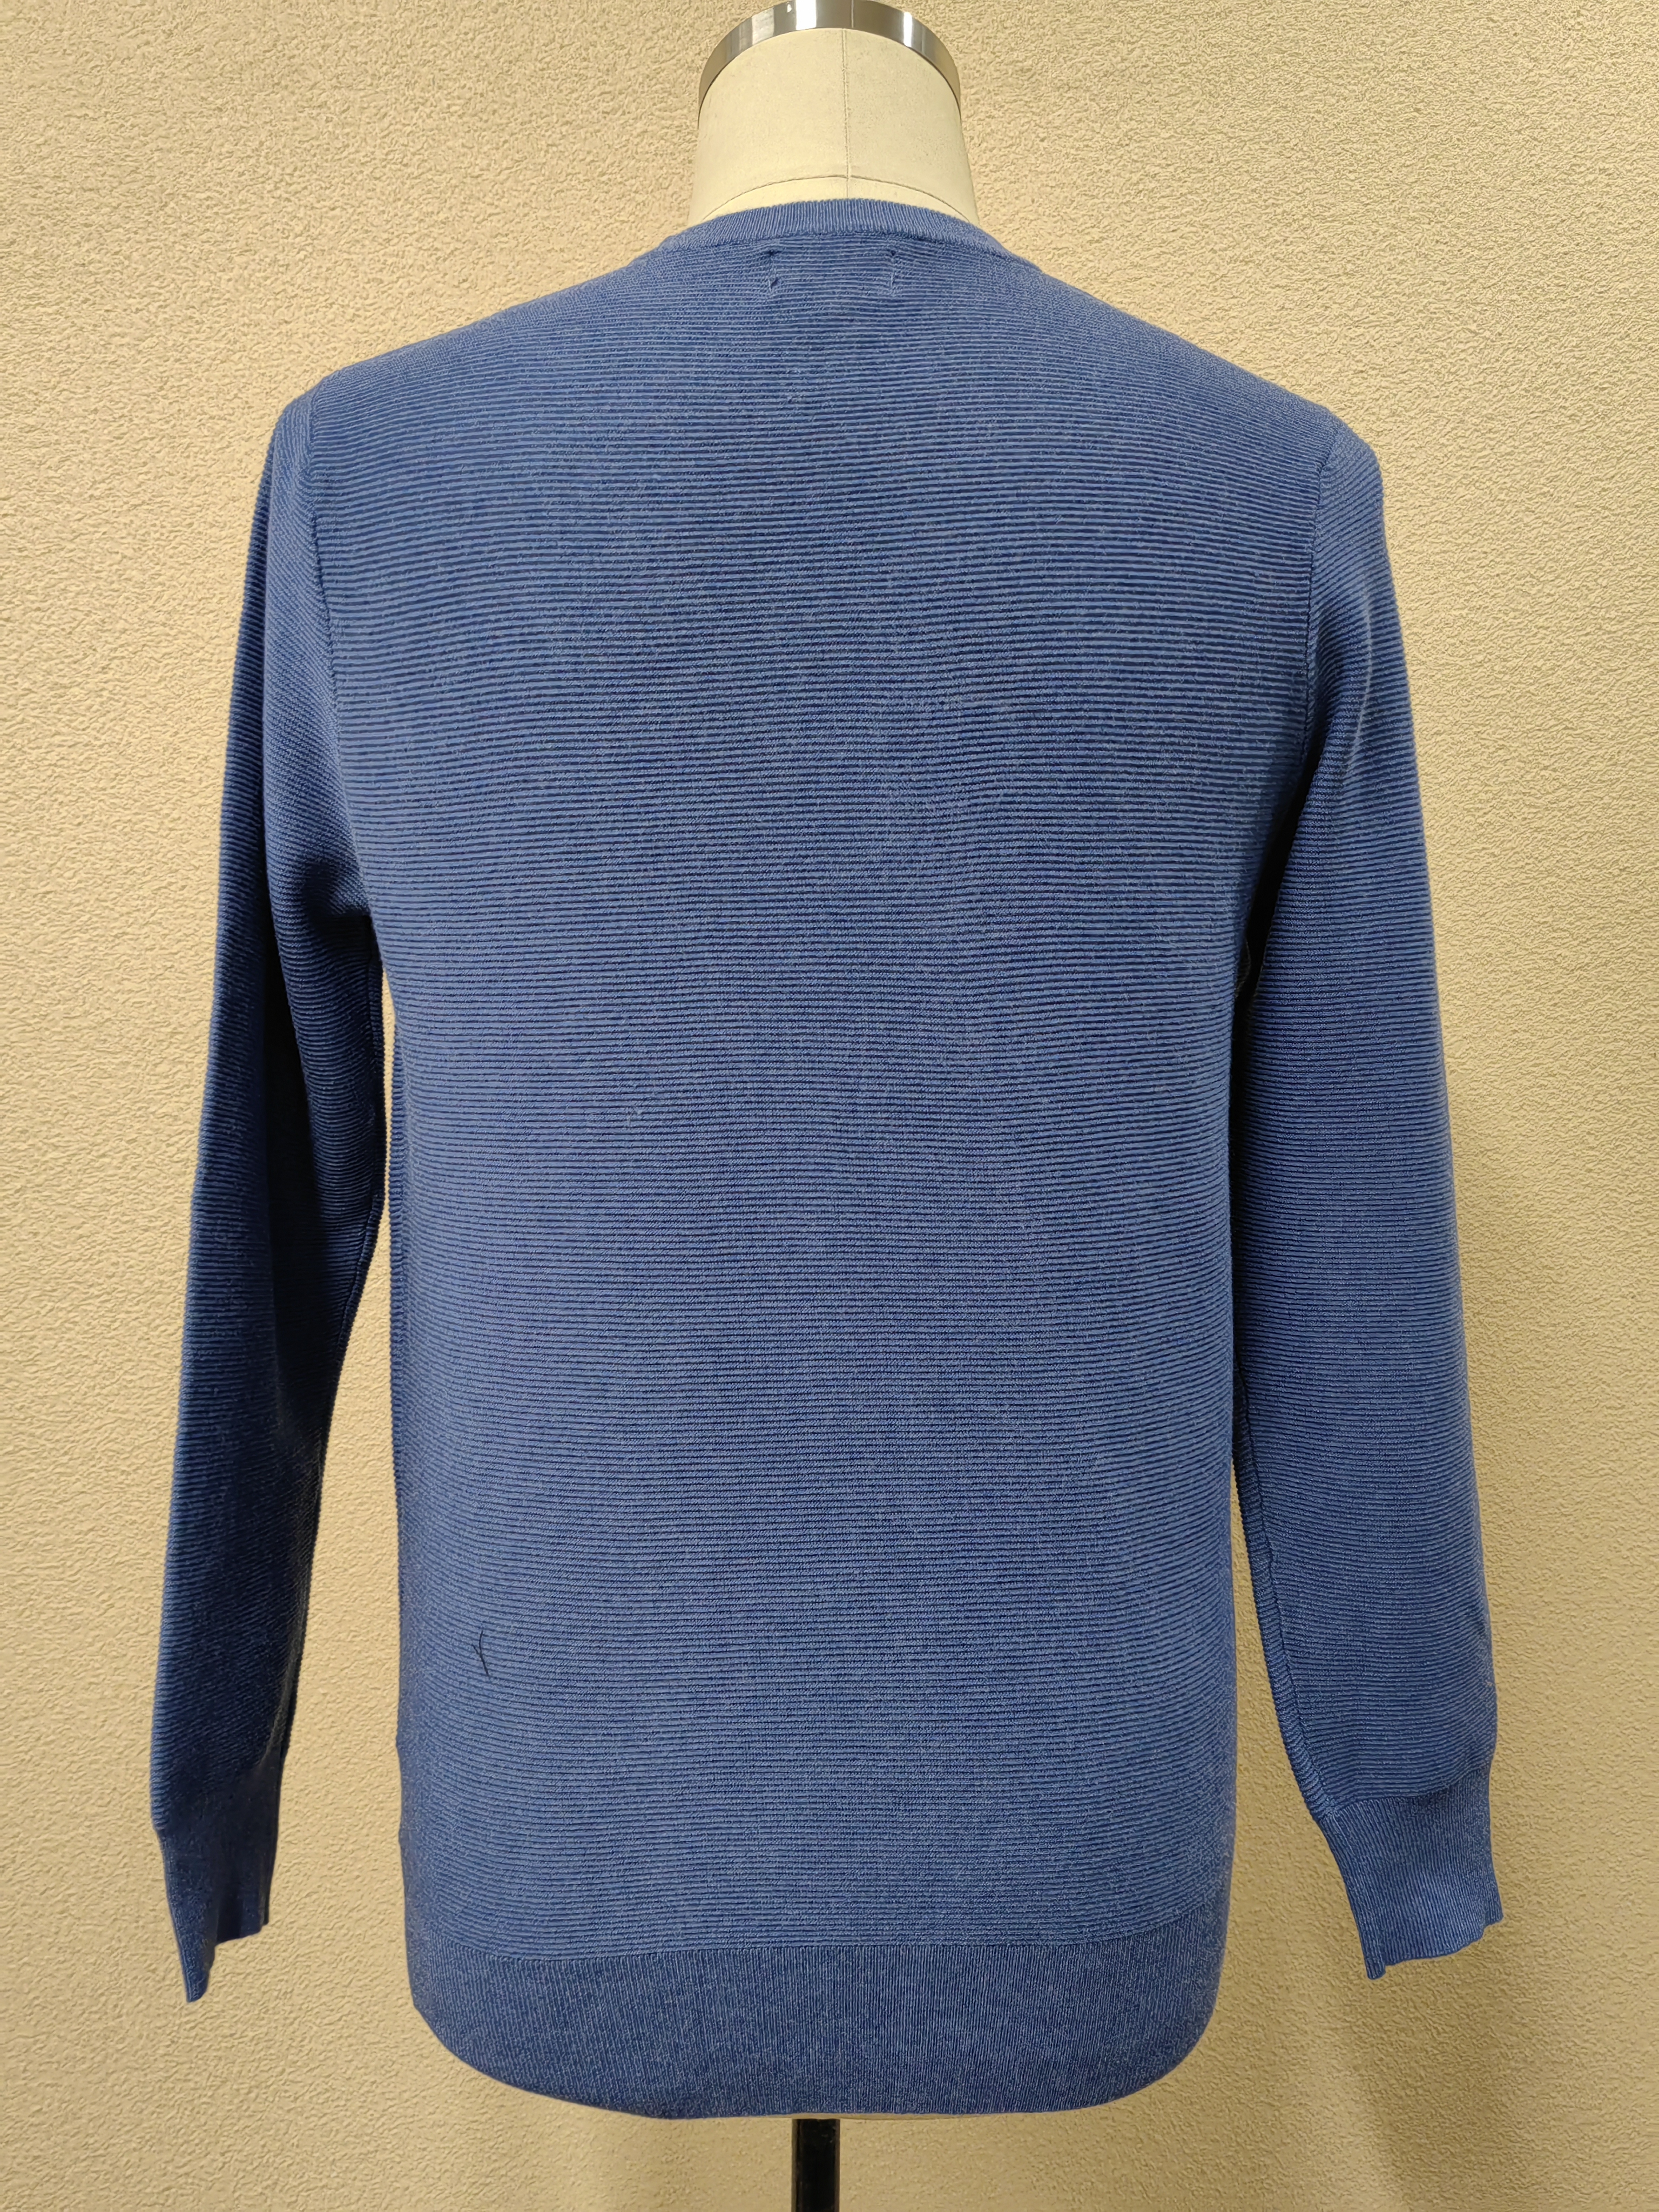 OEM Design Blue Knitted Long Sleeve Men's Casual Sweater Crewneck Pullovers Sweater